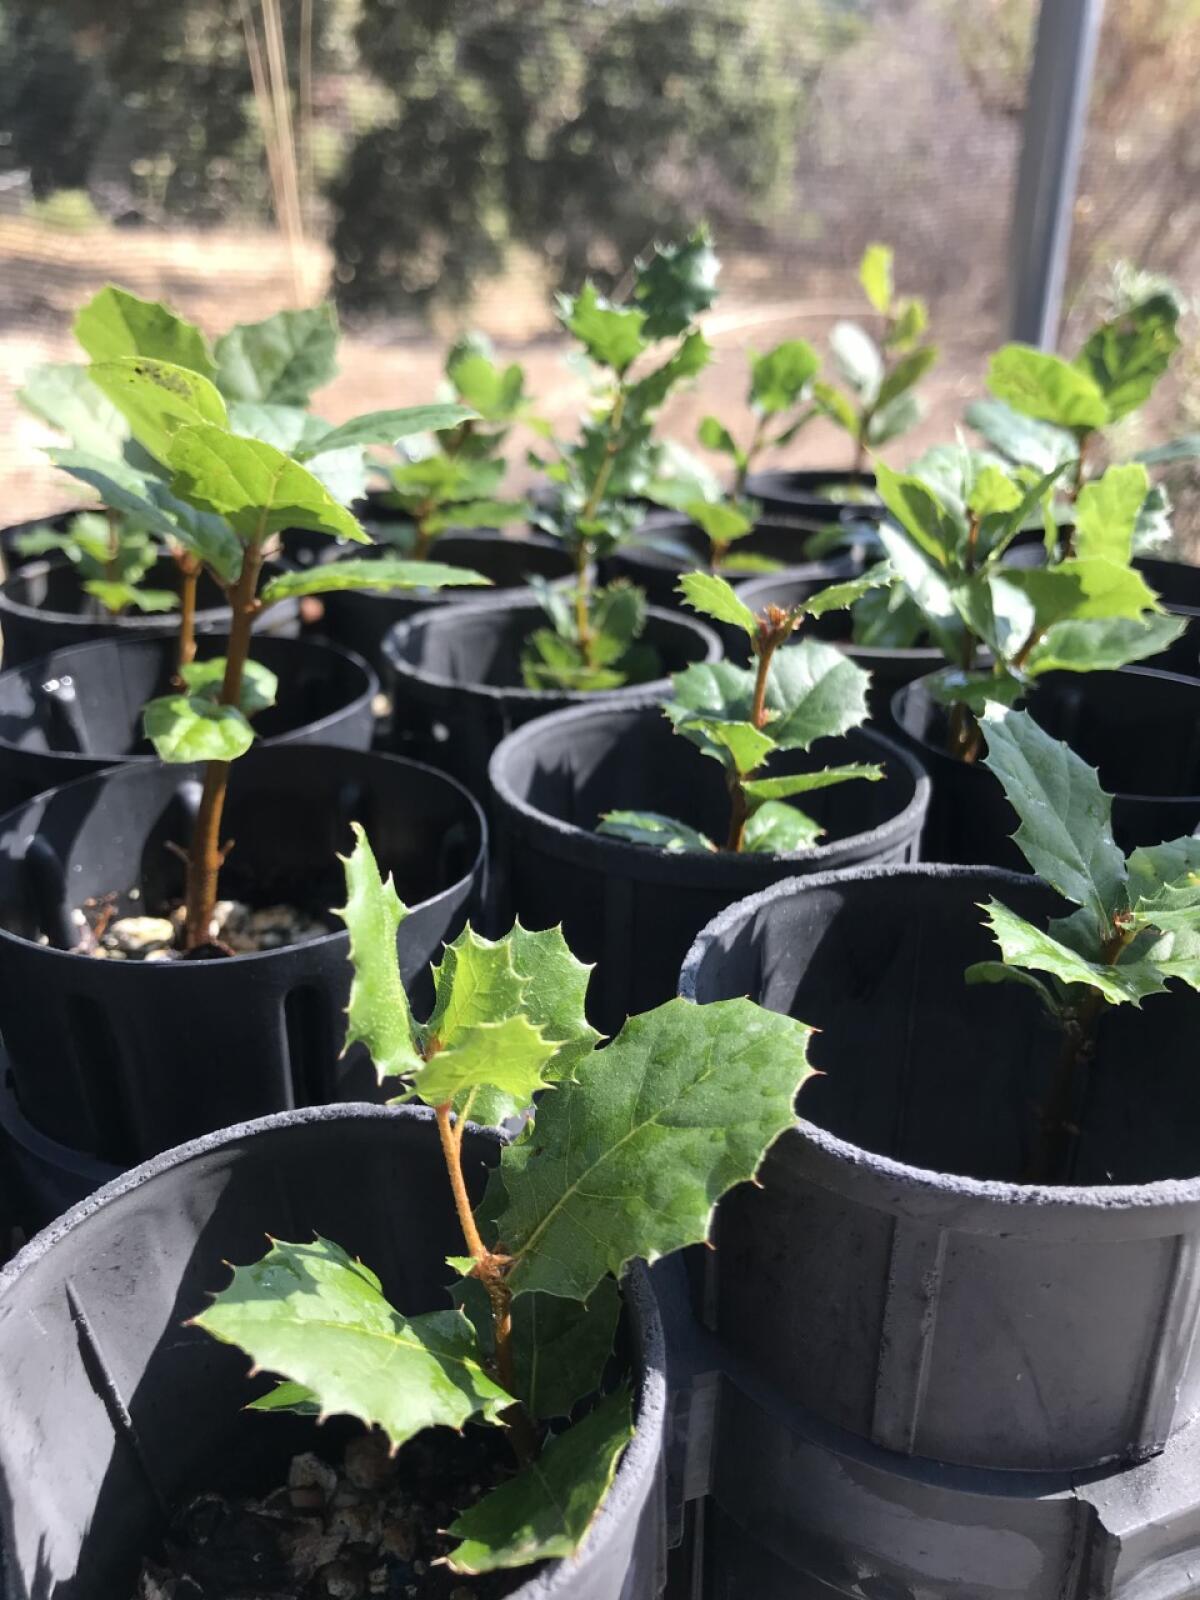 The Irvine Ranch Conservancy will plant oak seedlings in areas of Limestone Canyon.